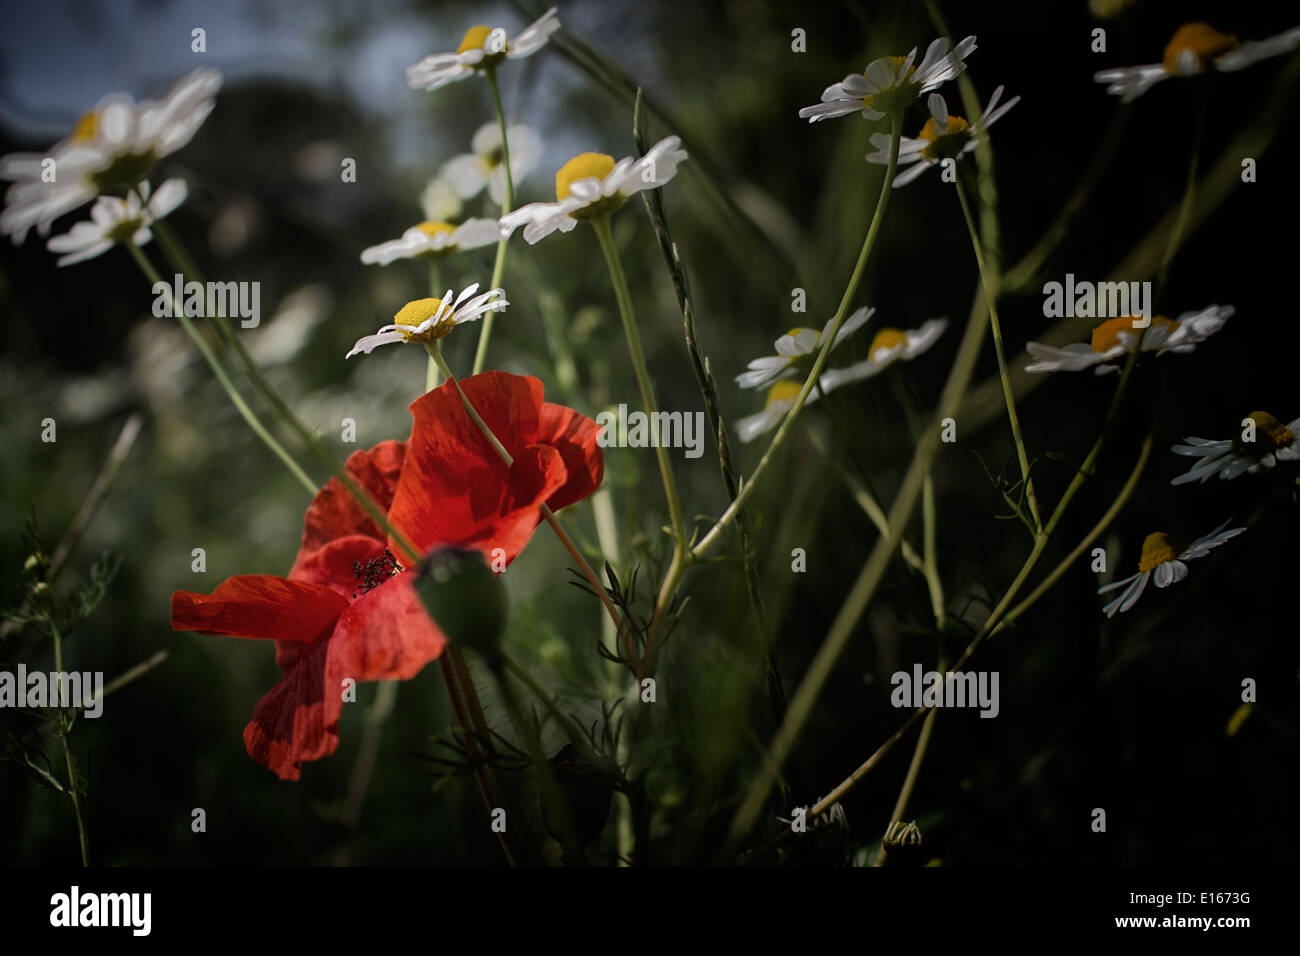 Red poppies and yellow and white daisies Stock Photo